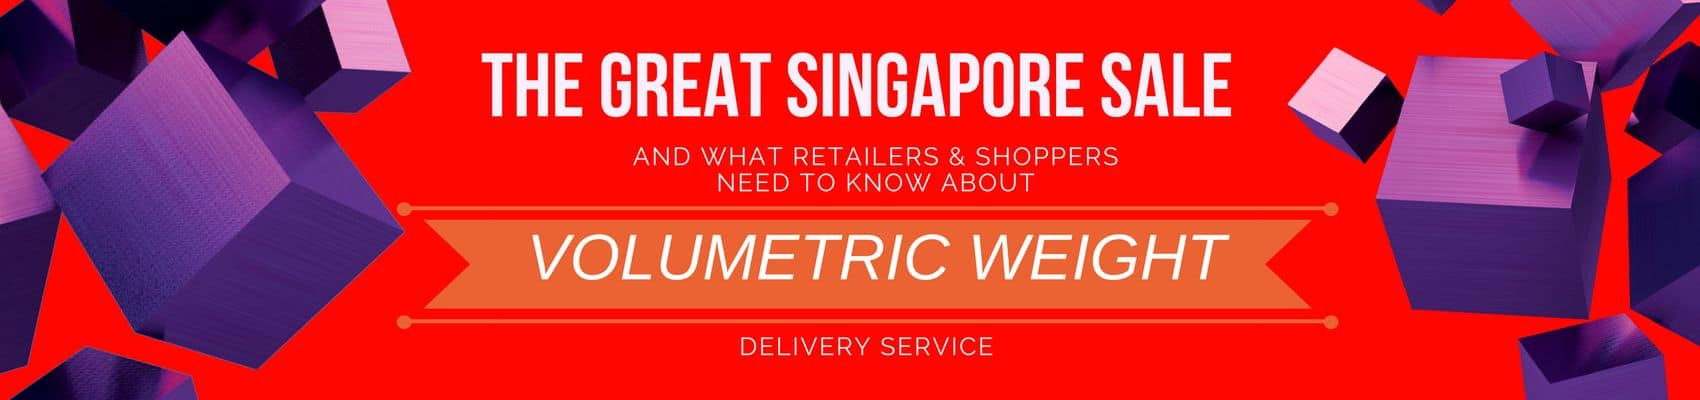 top 10 courier companies in singapore courier service same day delivery singapore courier service singapore